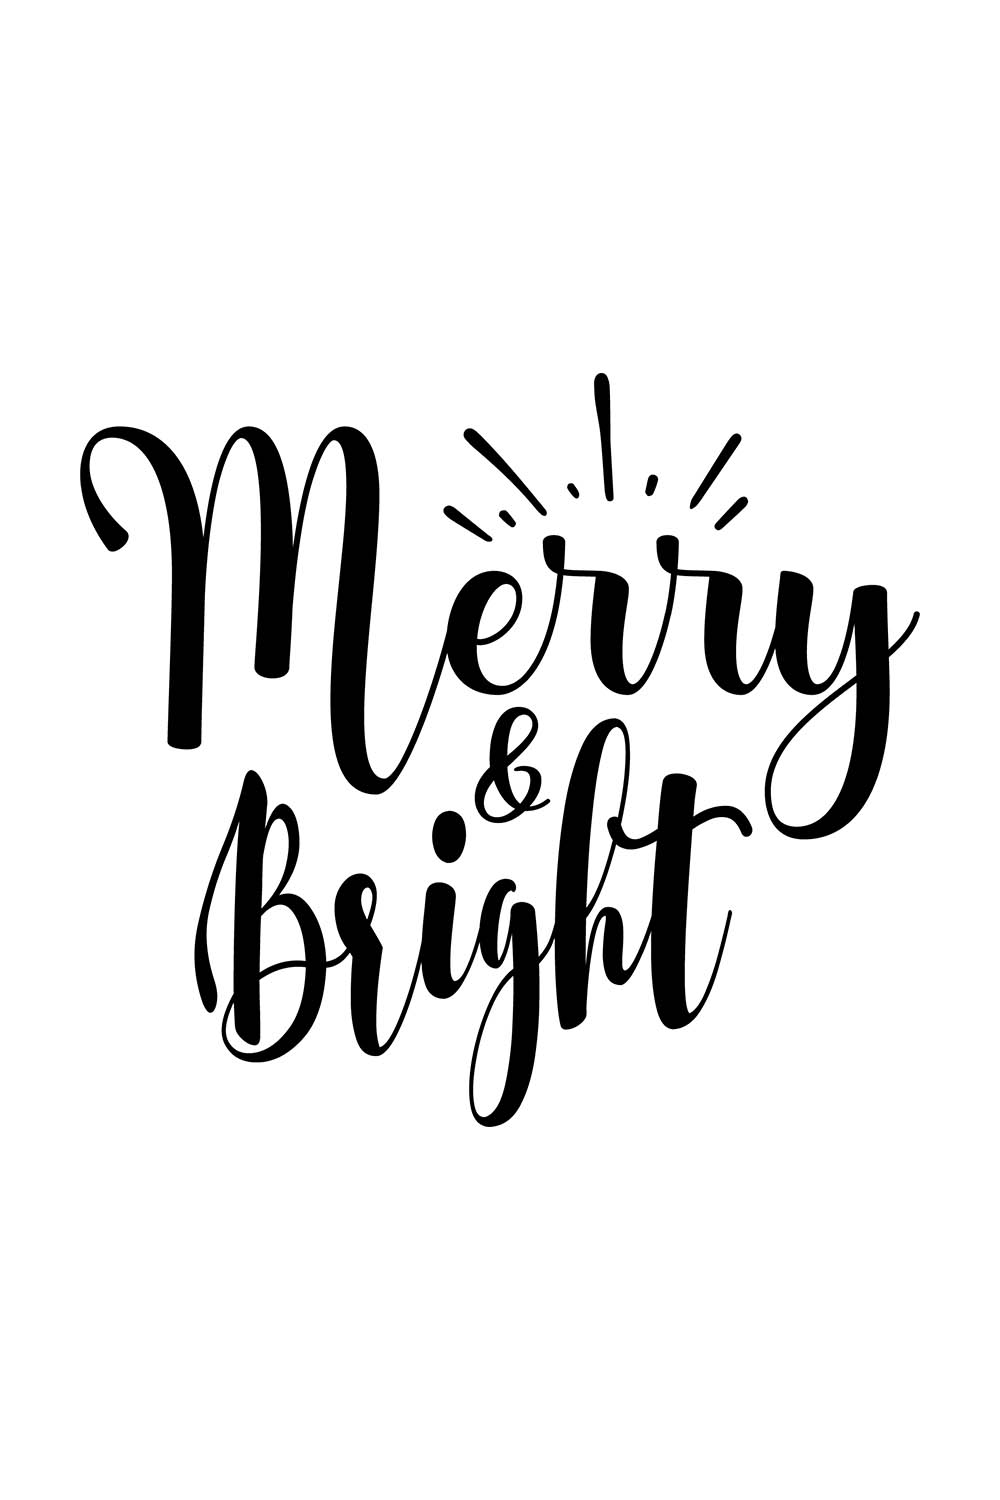 Image with gorgeous black lettering for Merry & Bright prints.